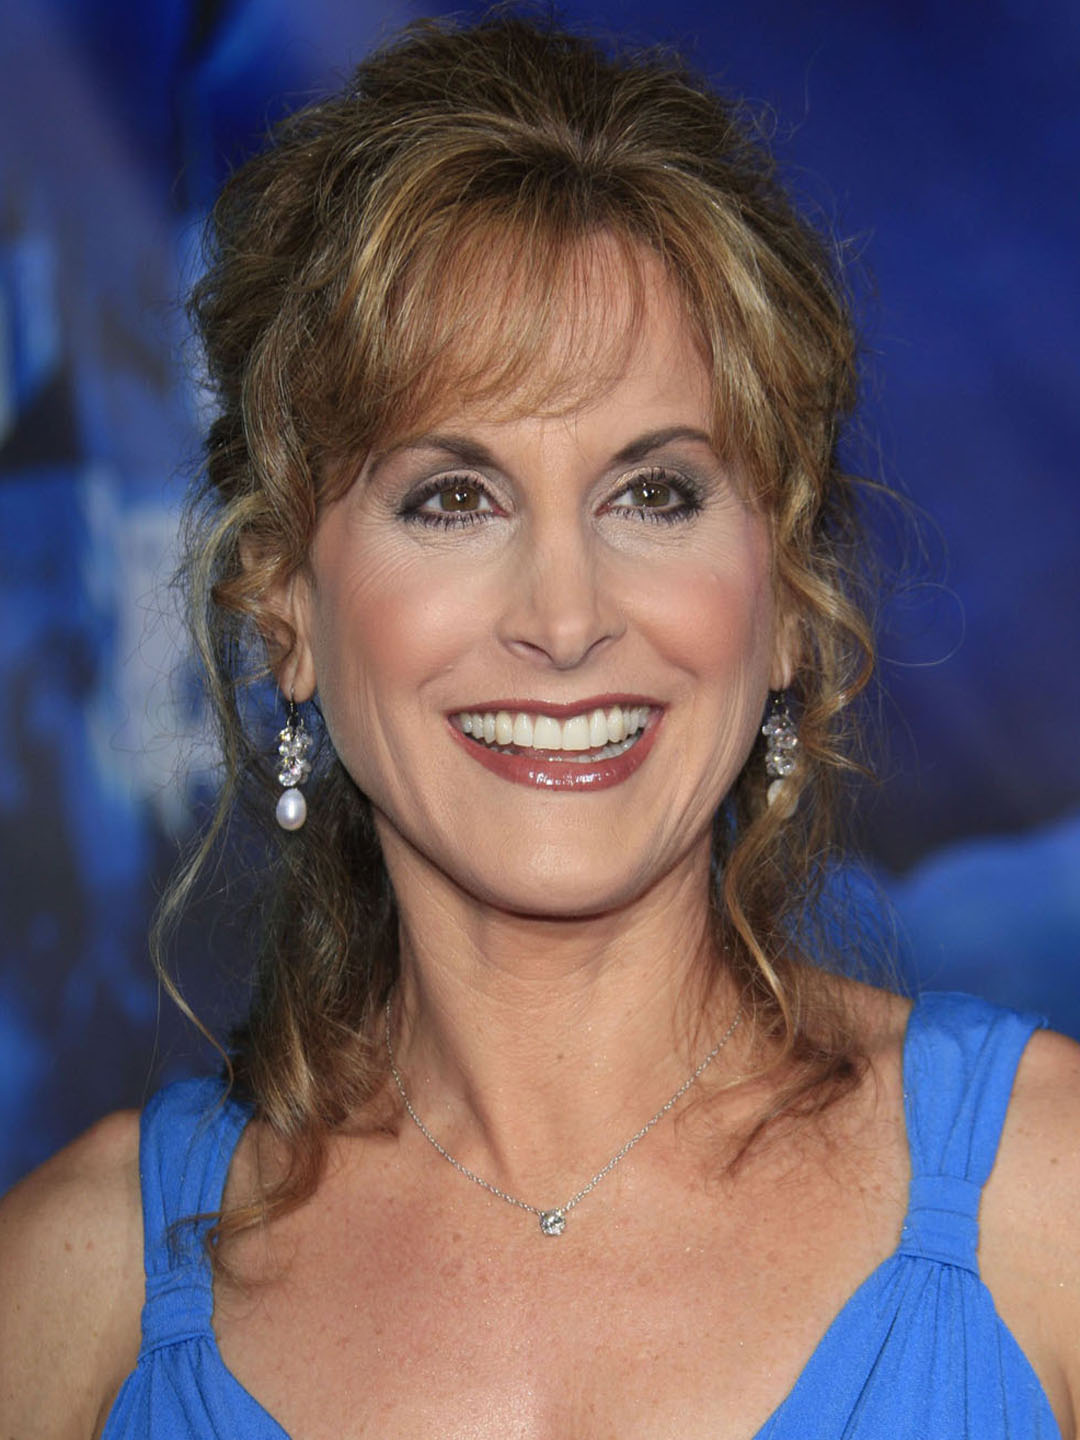 The 62-year old daughter of father (?) and mother(?) Jodi Benson in 2024 photo. Jodi Benson earned a  million dollar salary - leaving the net worth at  million in 2024